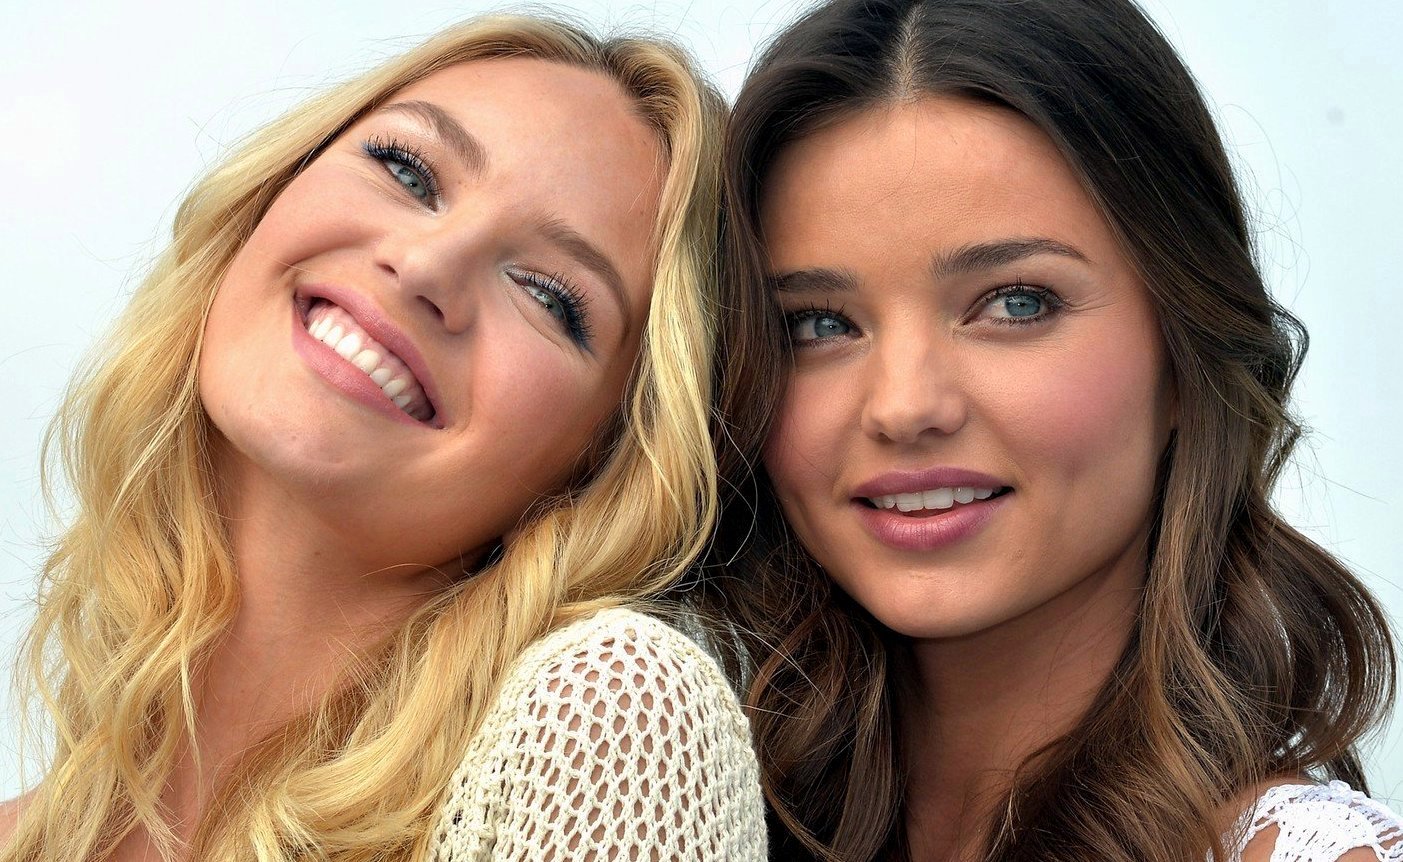 Victoria's Secret Angels Candice Swanepoel and Miranda Kerr Launch The 2012 VS Swim Collection at The Thompson Hotel on March 29, 2012 in Beverly Hills, California., Image: 126427310, License: Rights-managed, Restrictions: , Model Release: no, Credit line: Profimedia, TEMP Camerapress